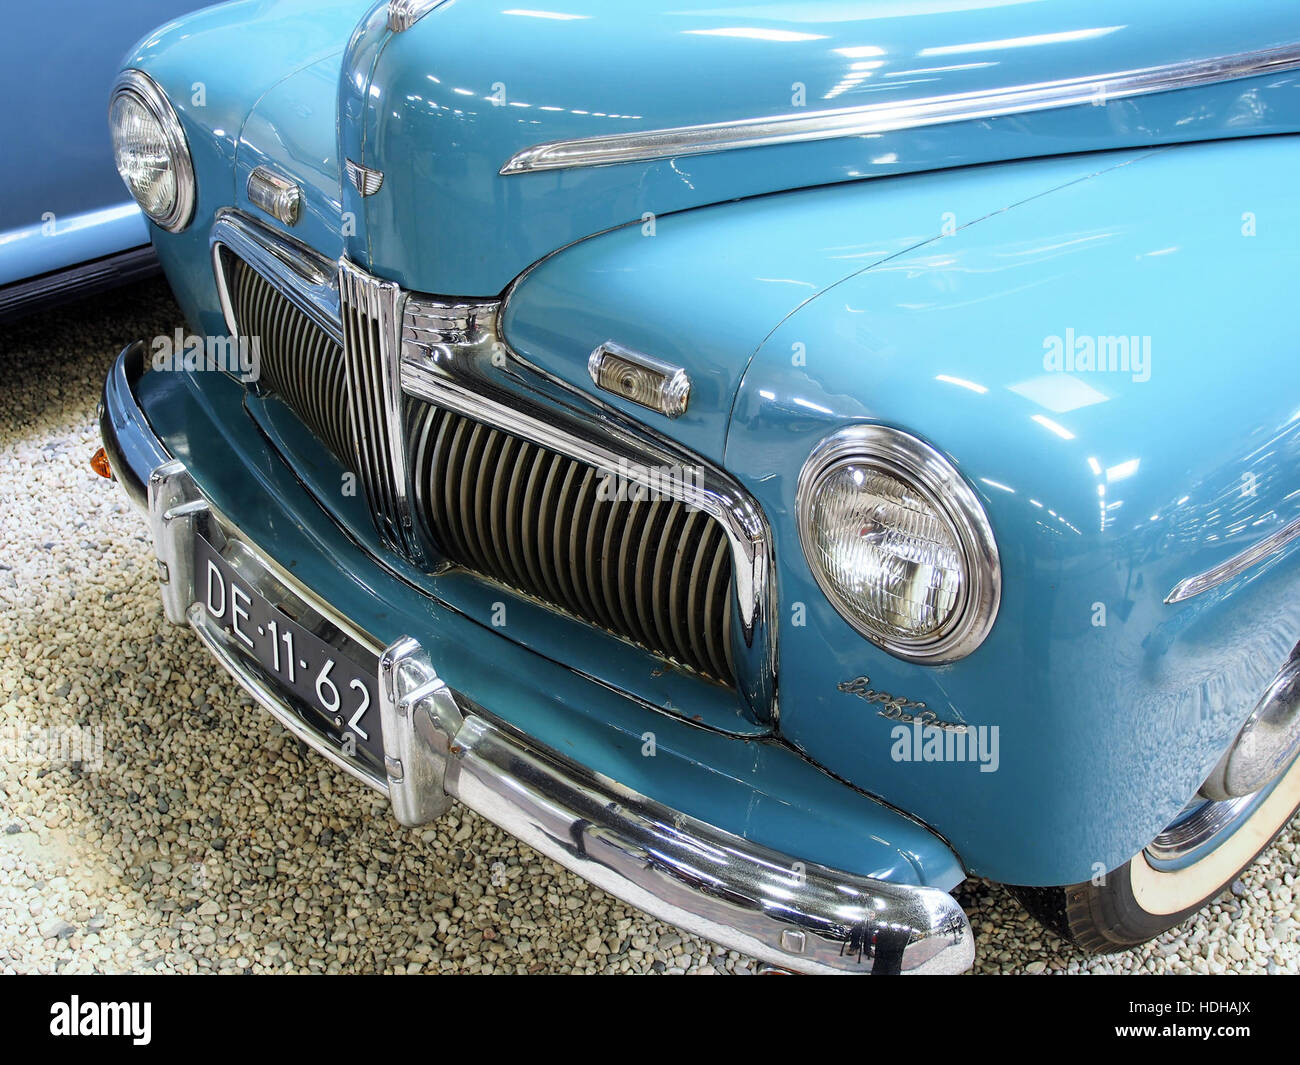 1942 Ford 76 Club Cabriolet pic21 Stockfoto